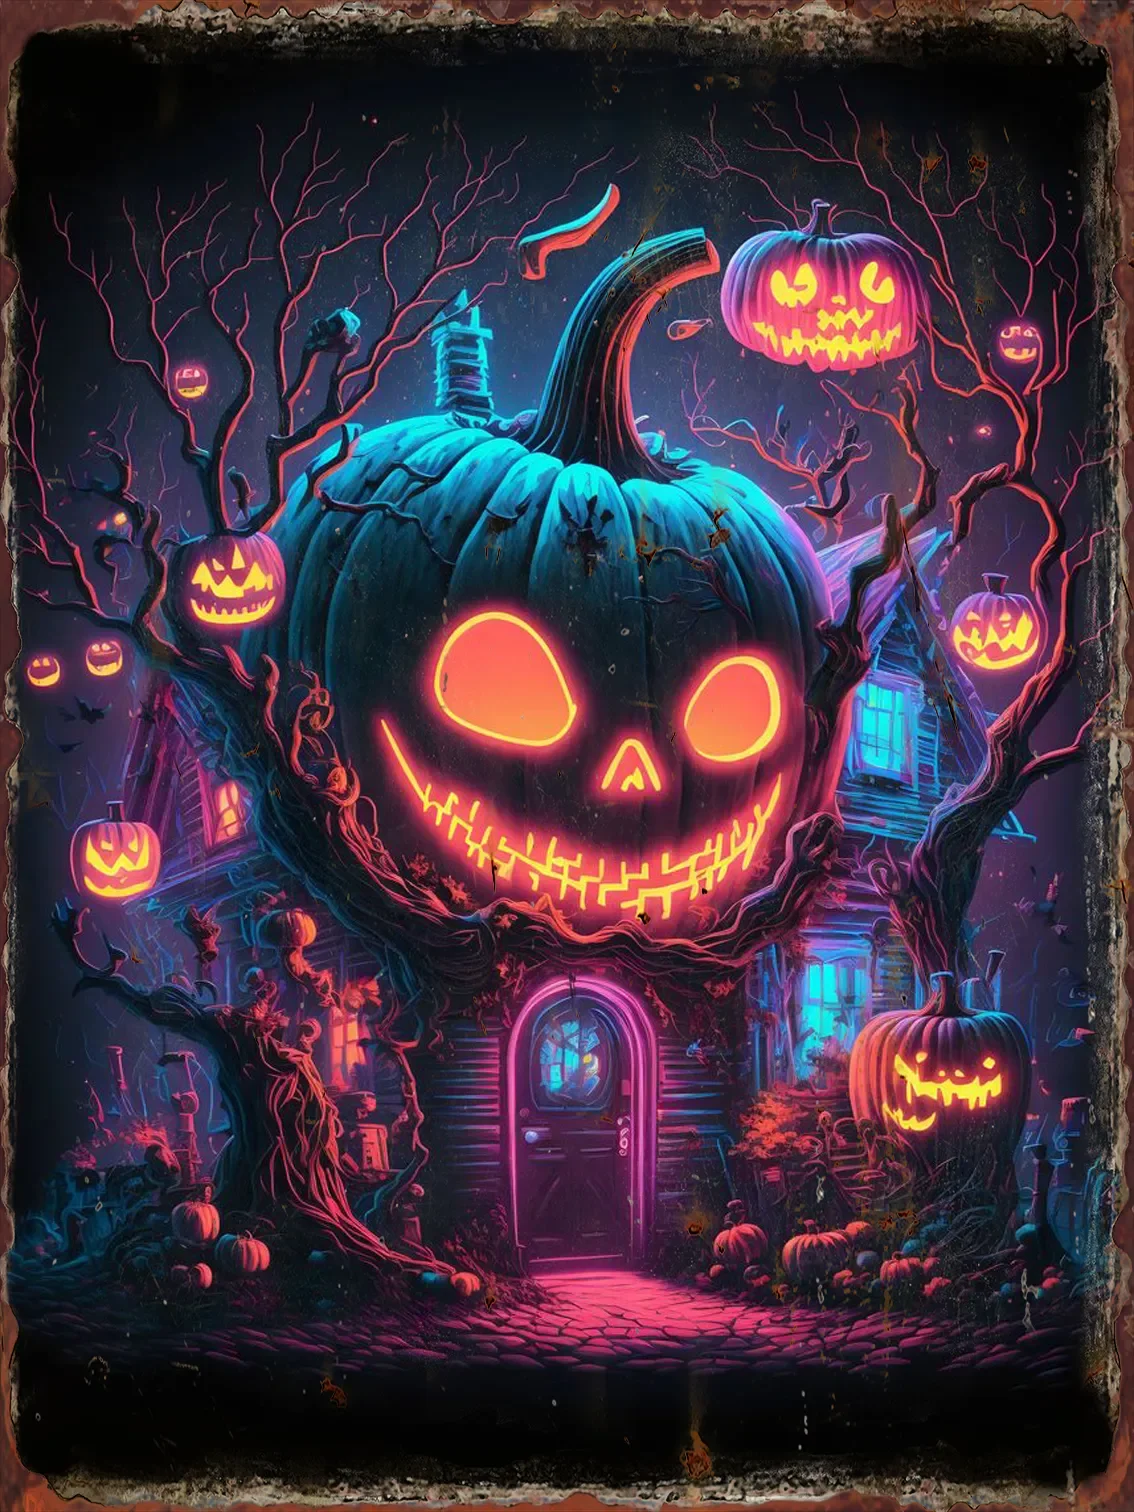 

Pumpkin Candles Metal Tin Sign Cafe Bar Pub Club Halloween Decoration Painting Posters Home Yard Fence Door Wall Decor Plaque